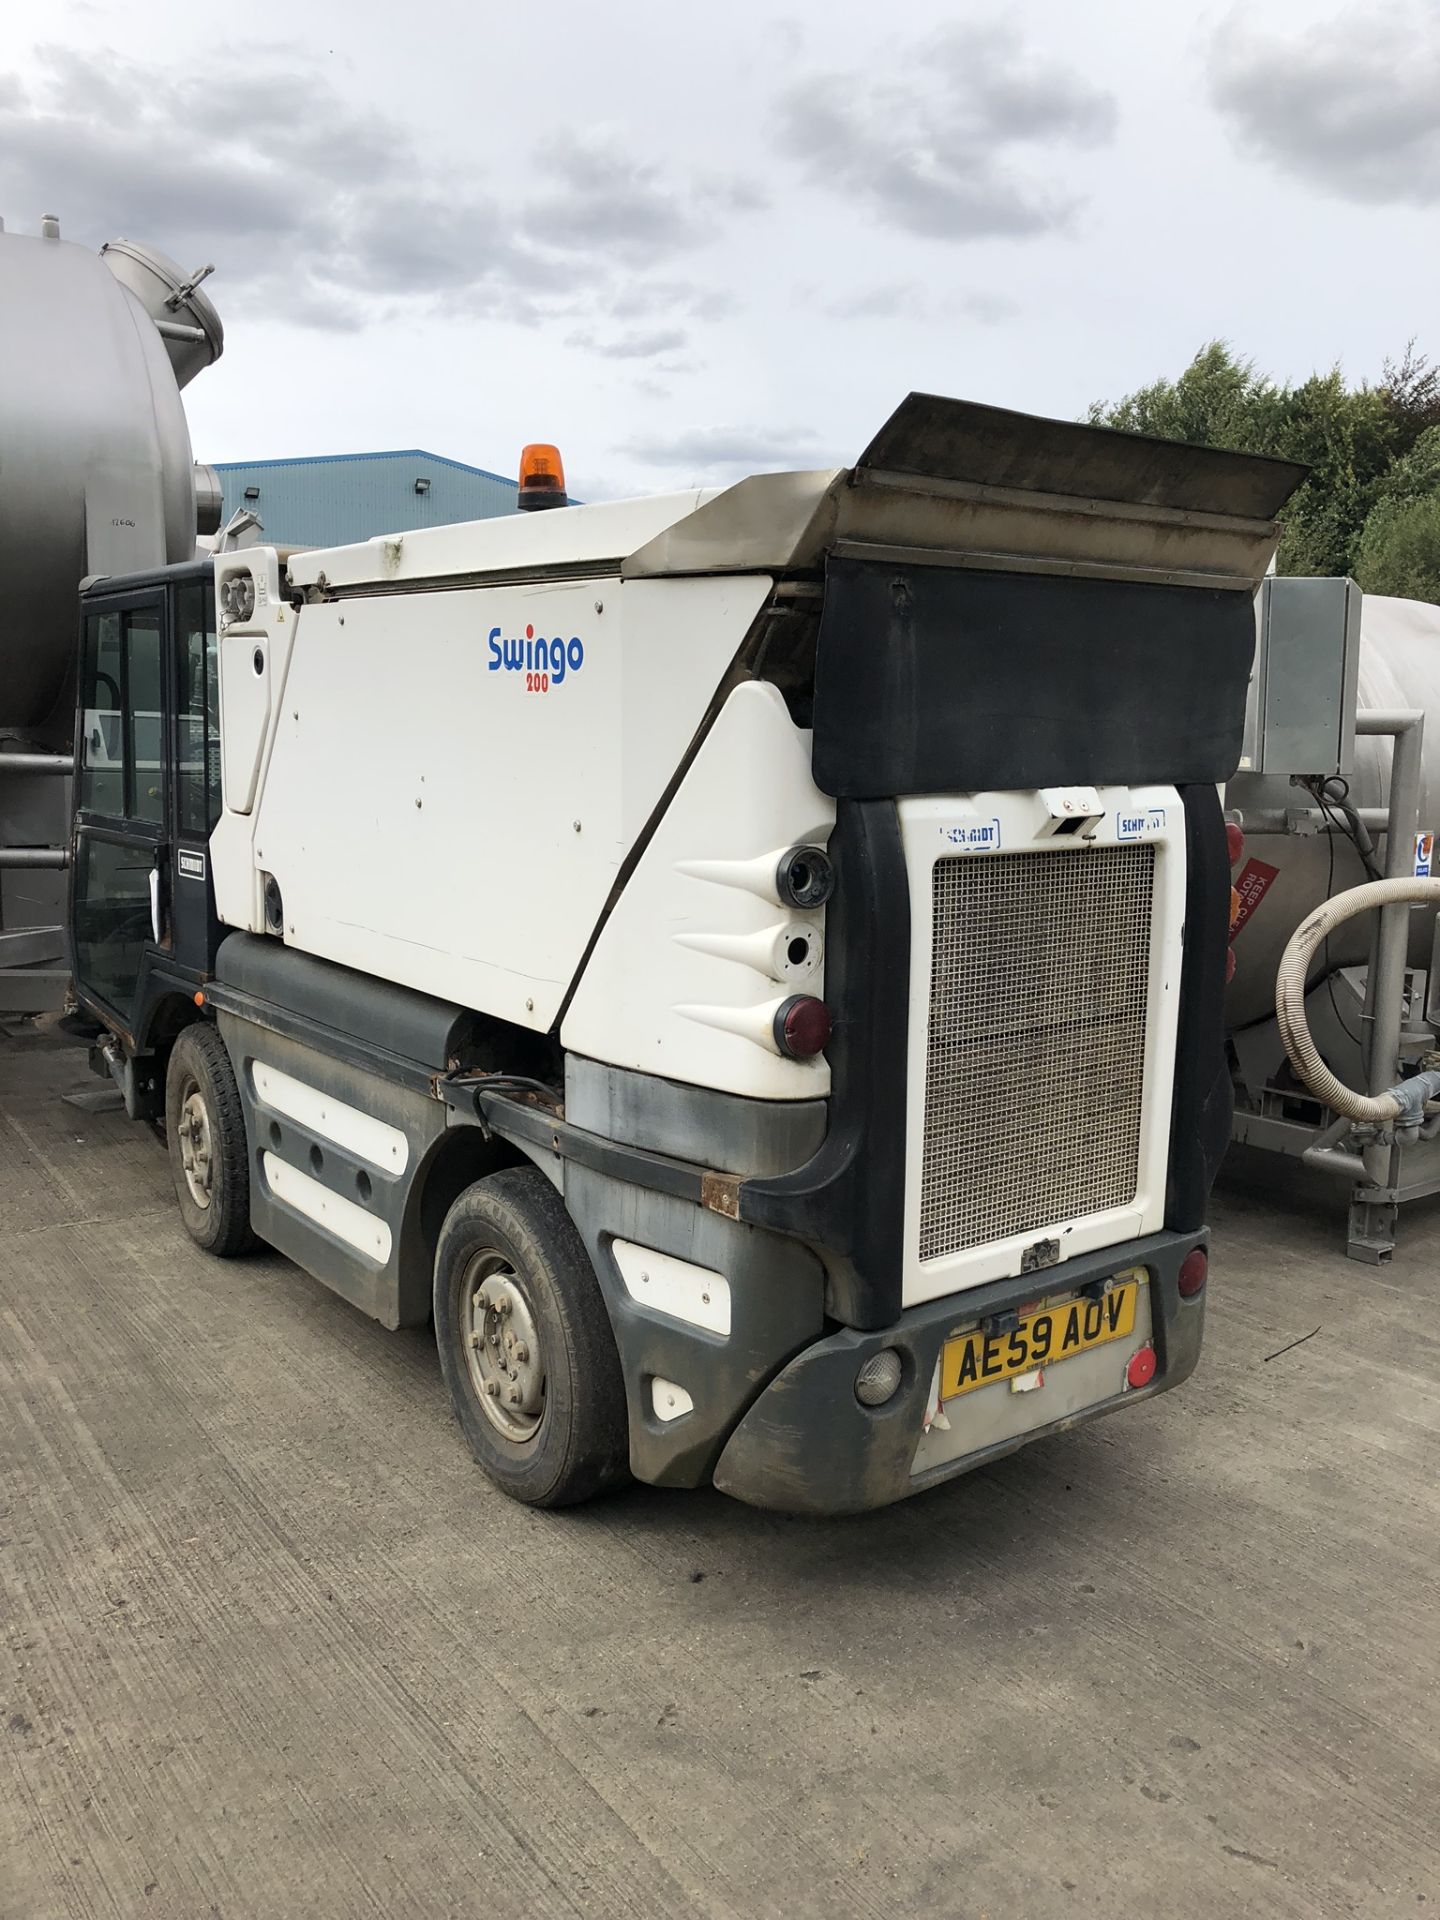 Schmidt Swingo 200 Road Sweeper, registration no. AE59 AOV (understood to require attention - non- - Image 2 of 3